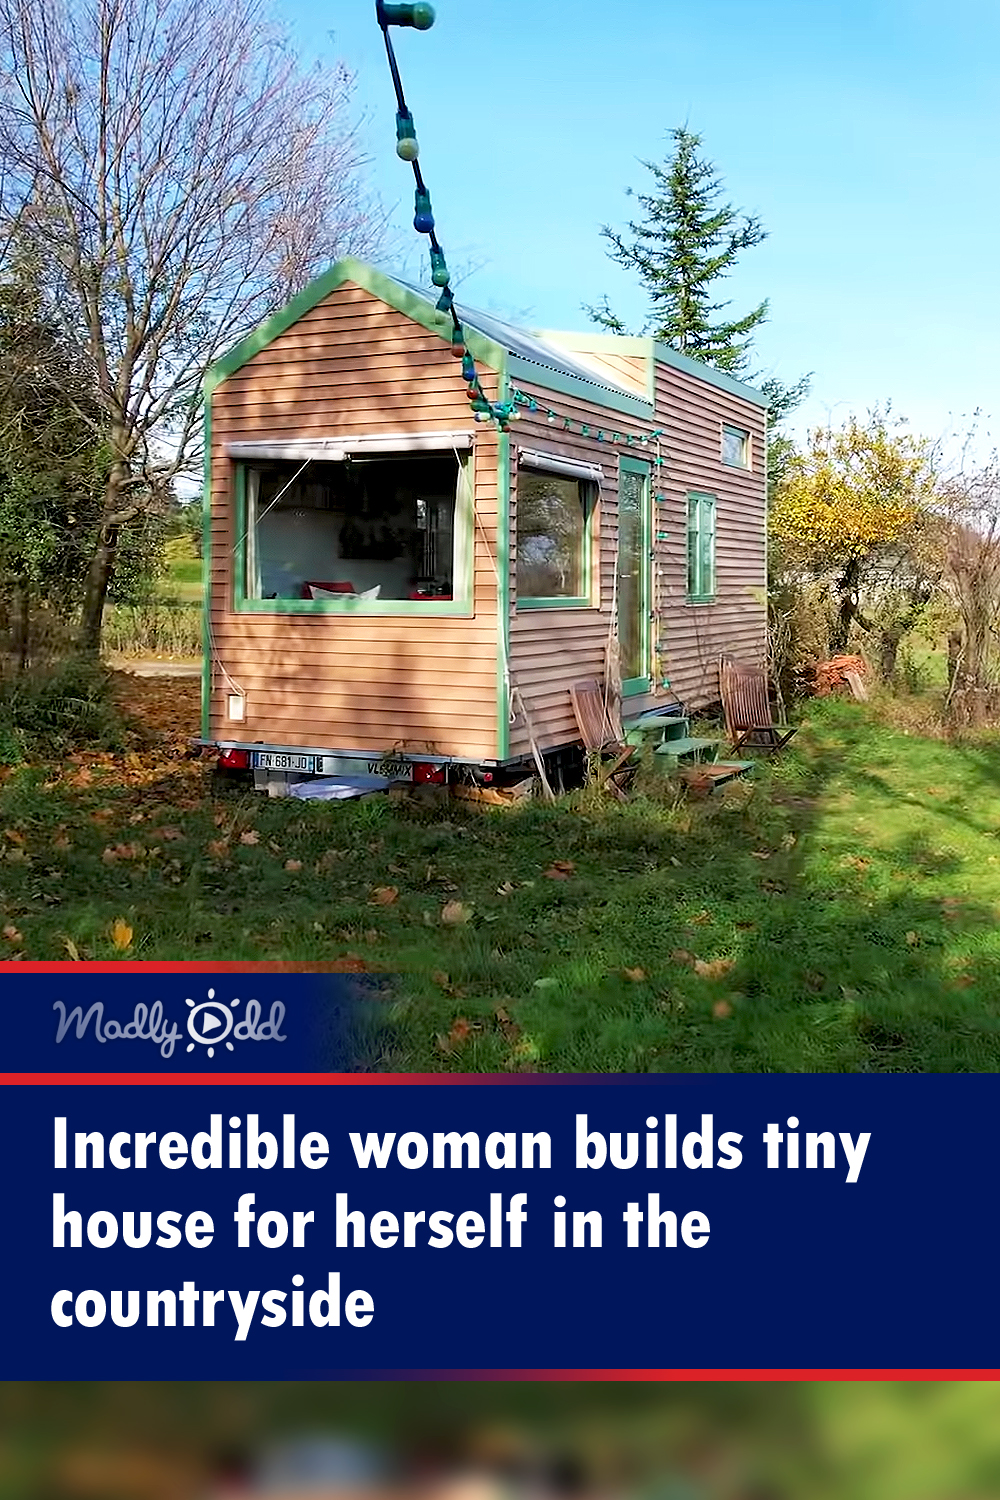 Incredible woman builds tiny house for herself in the countryside